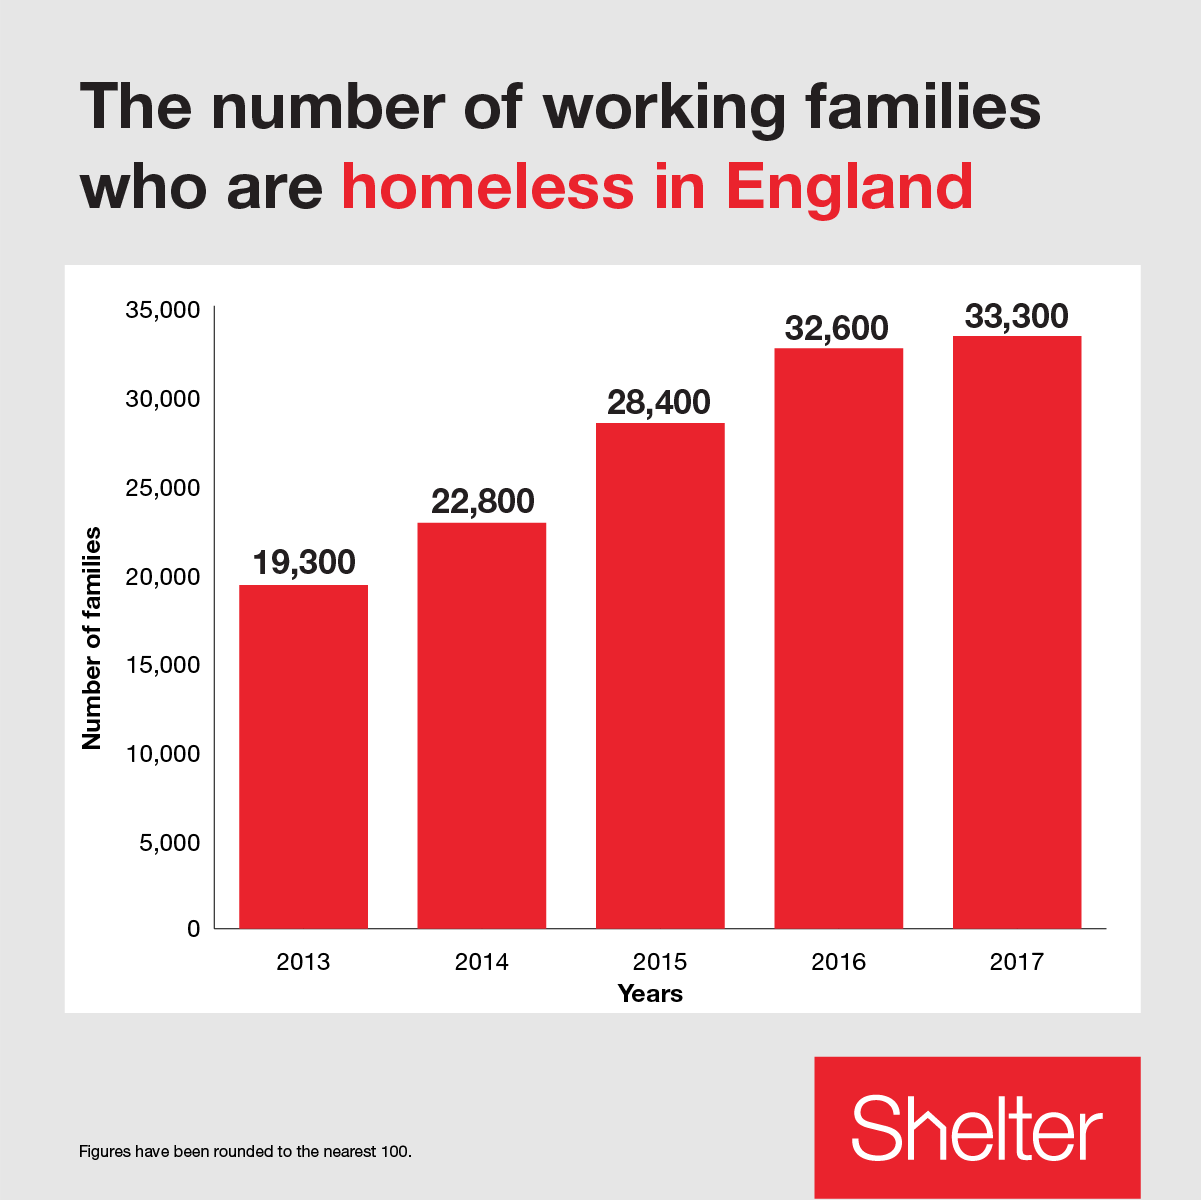 Over Half Of Homeless Families In England Are In Work Shock New | Free ...